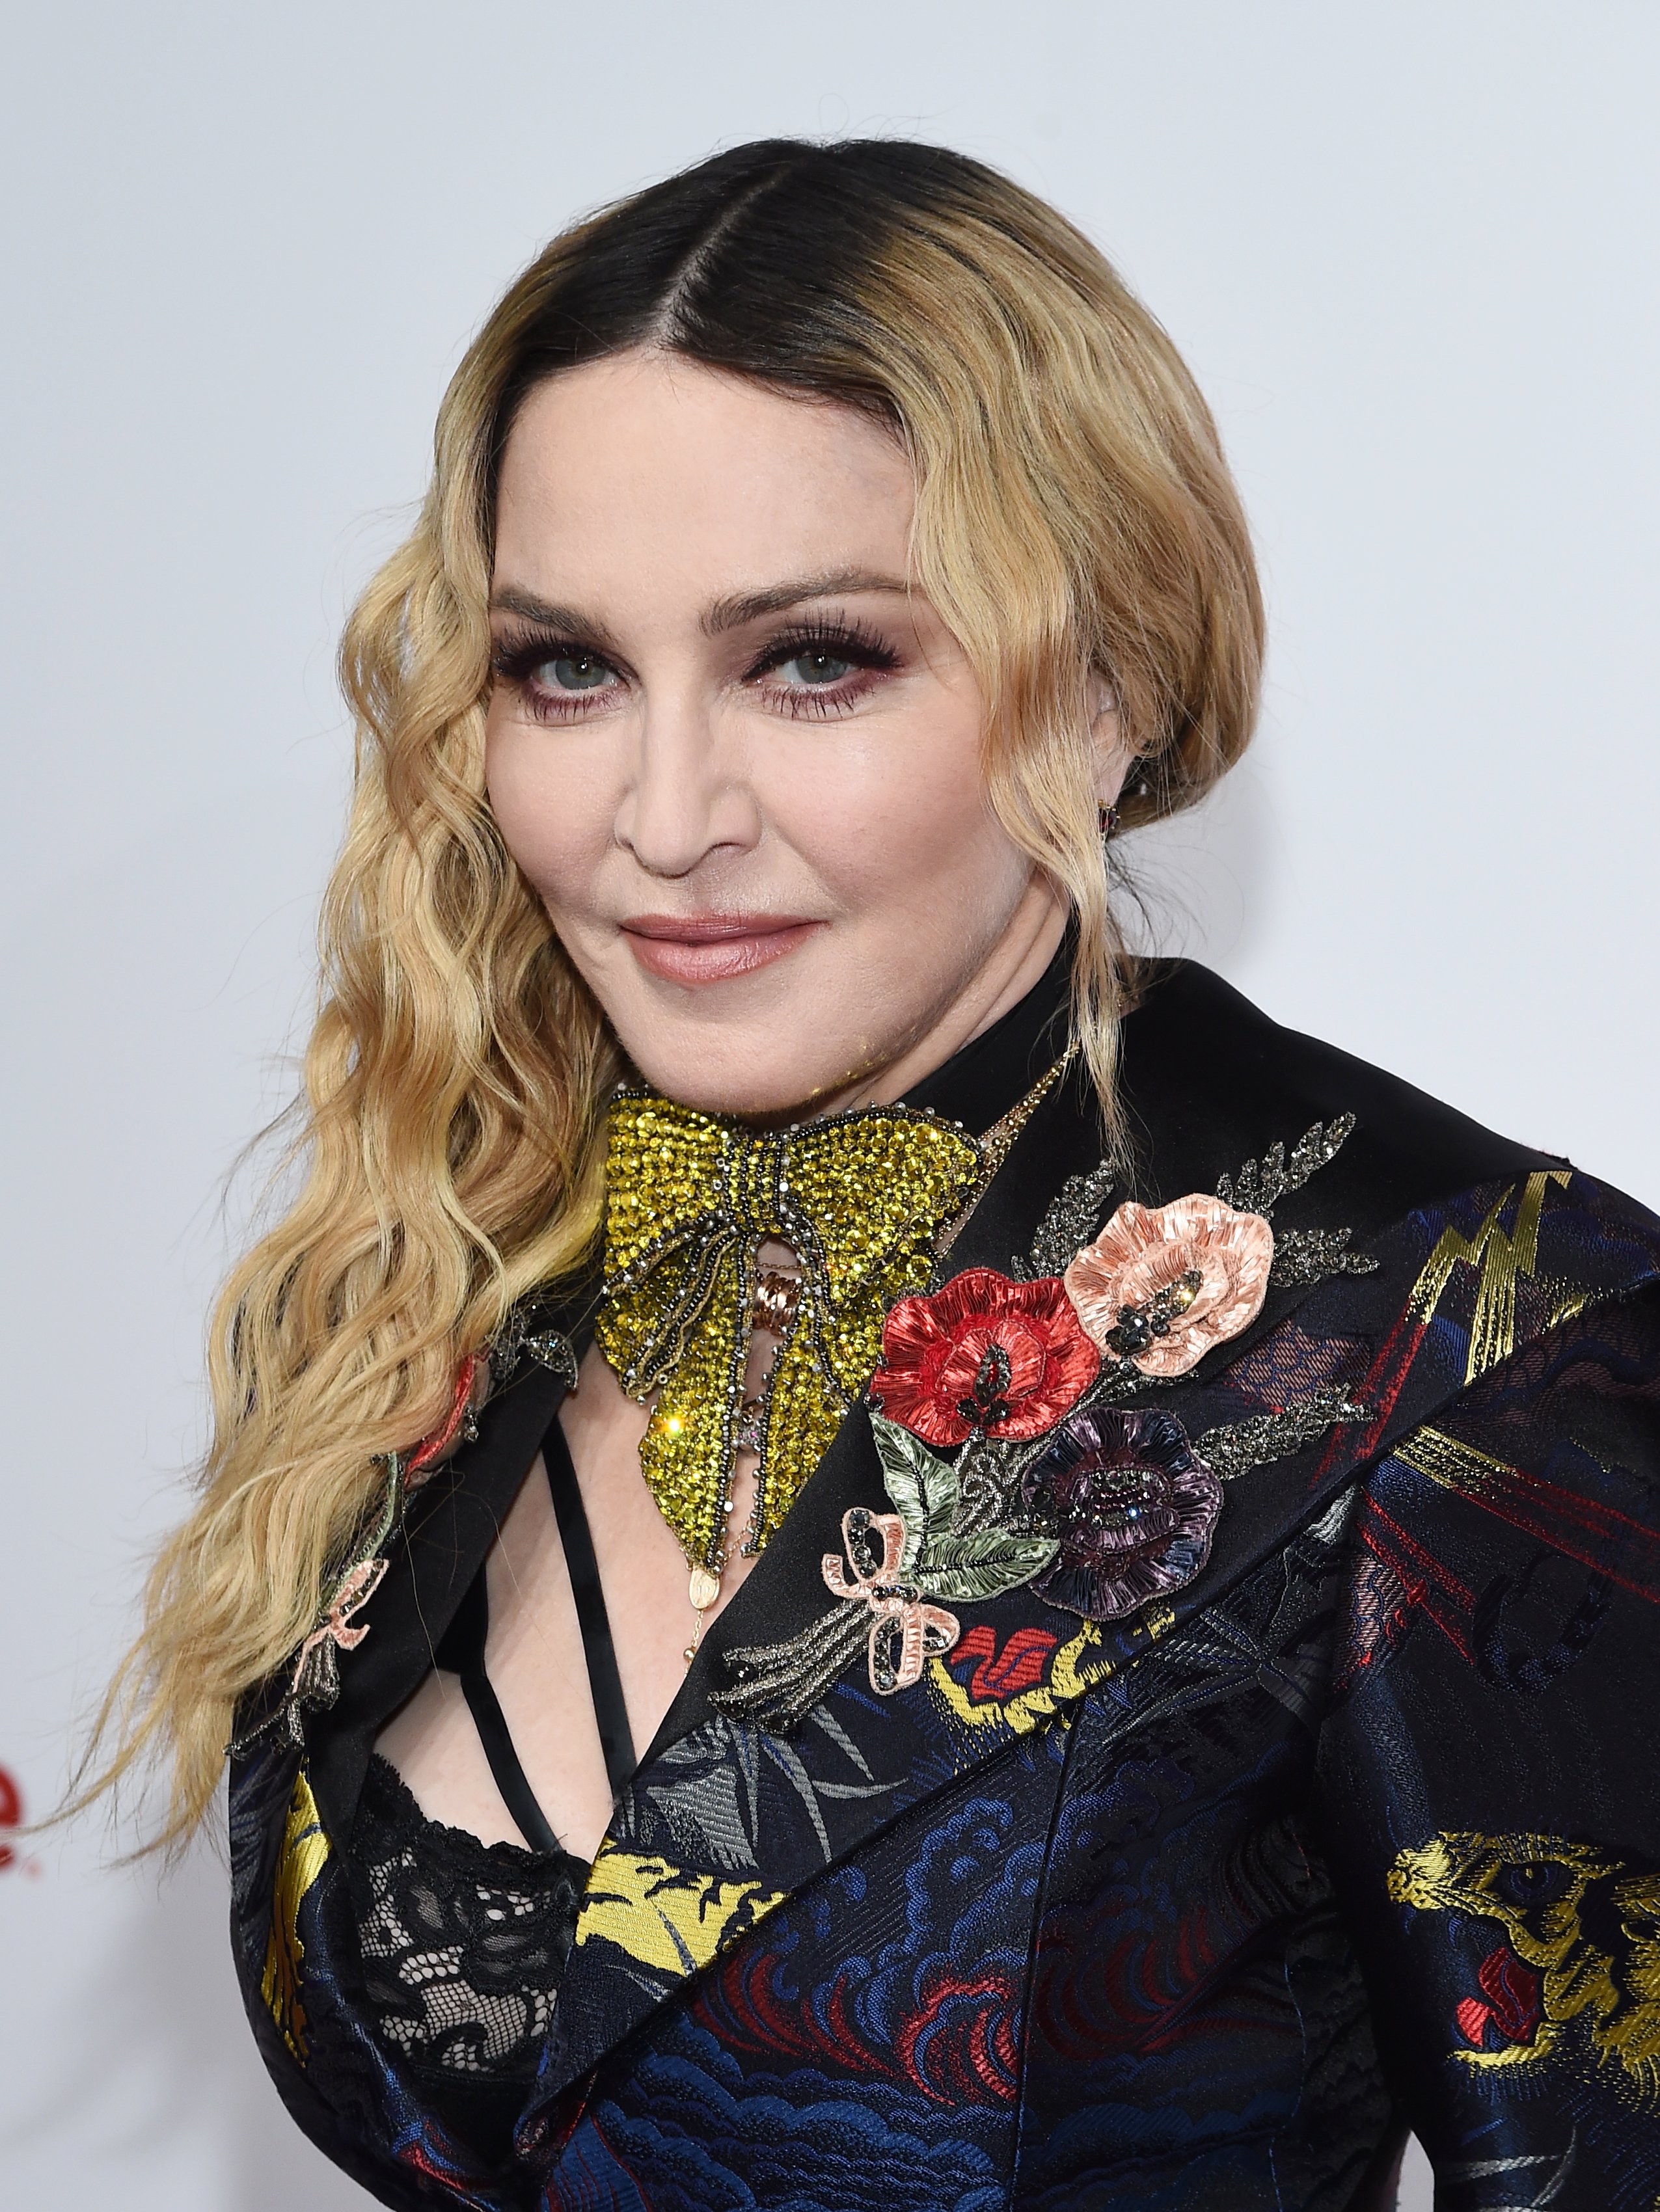 Madonna attending the 2016 Billboard Women in Music awards show. | Photo: Getty Images